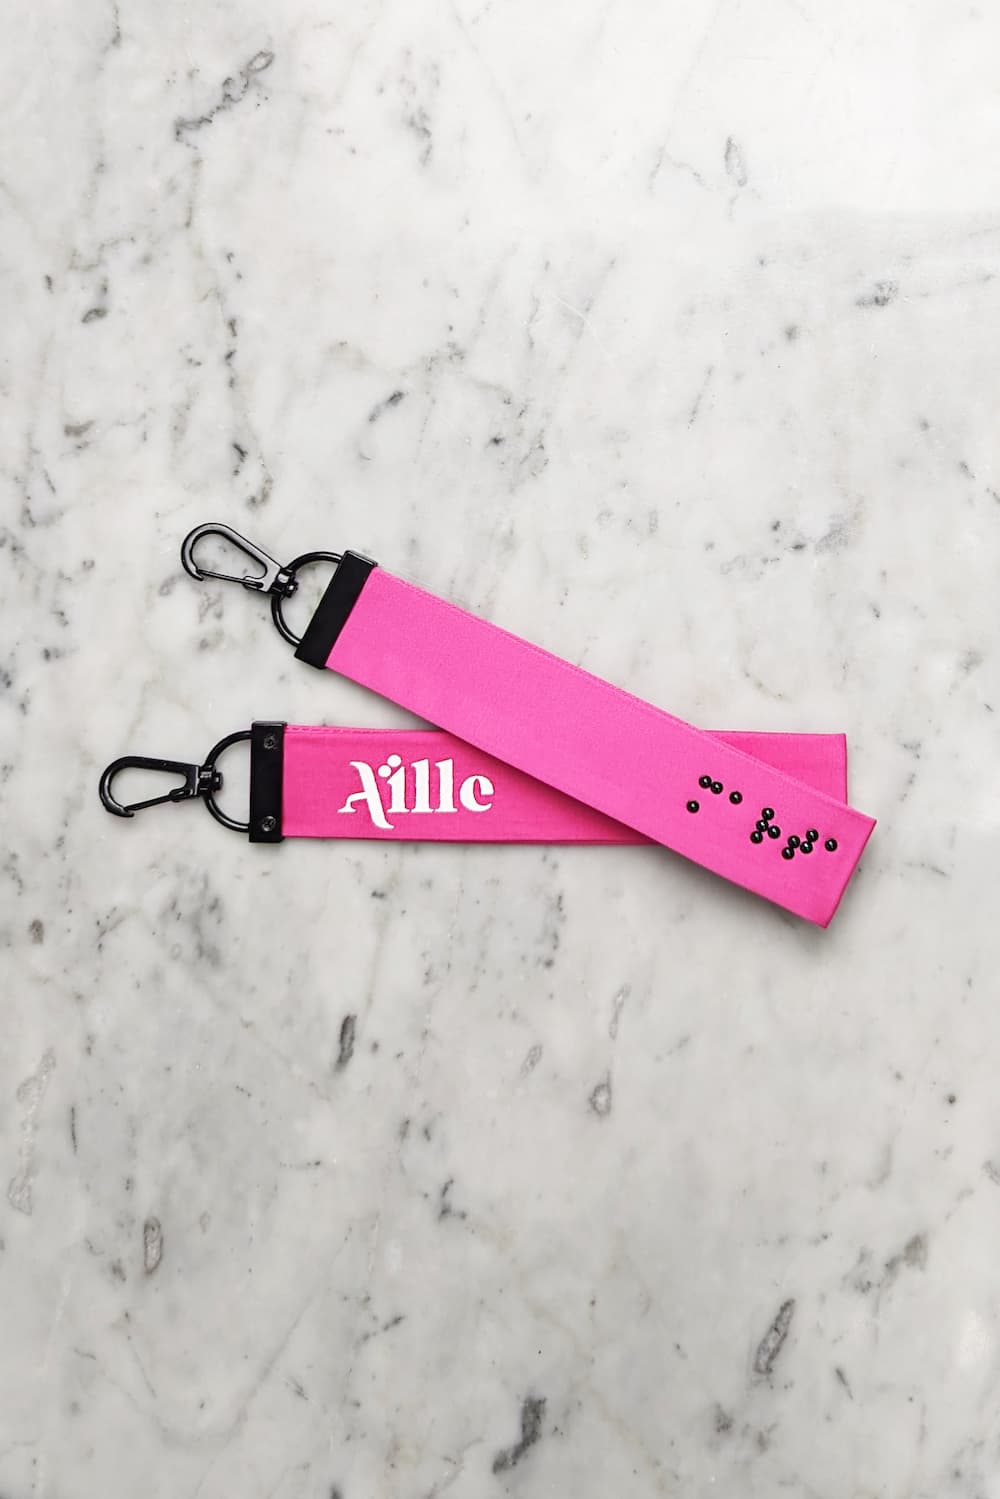 Hot pink keychain with black braille on one side and a white screen printed Aille Design logo on the other side.